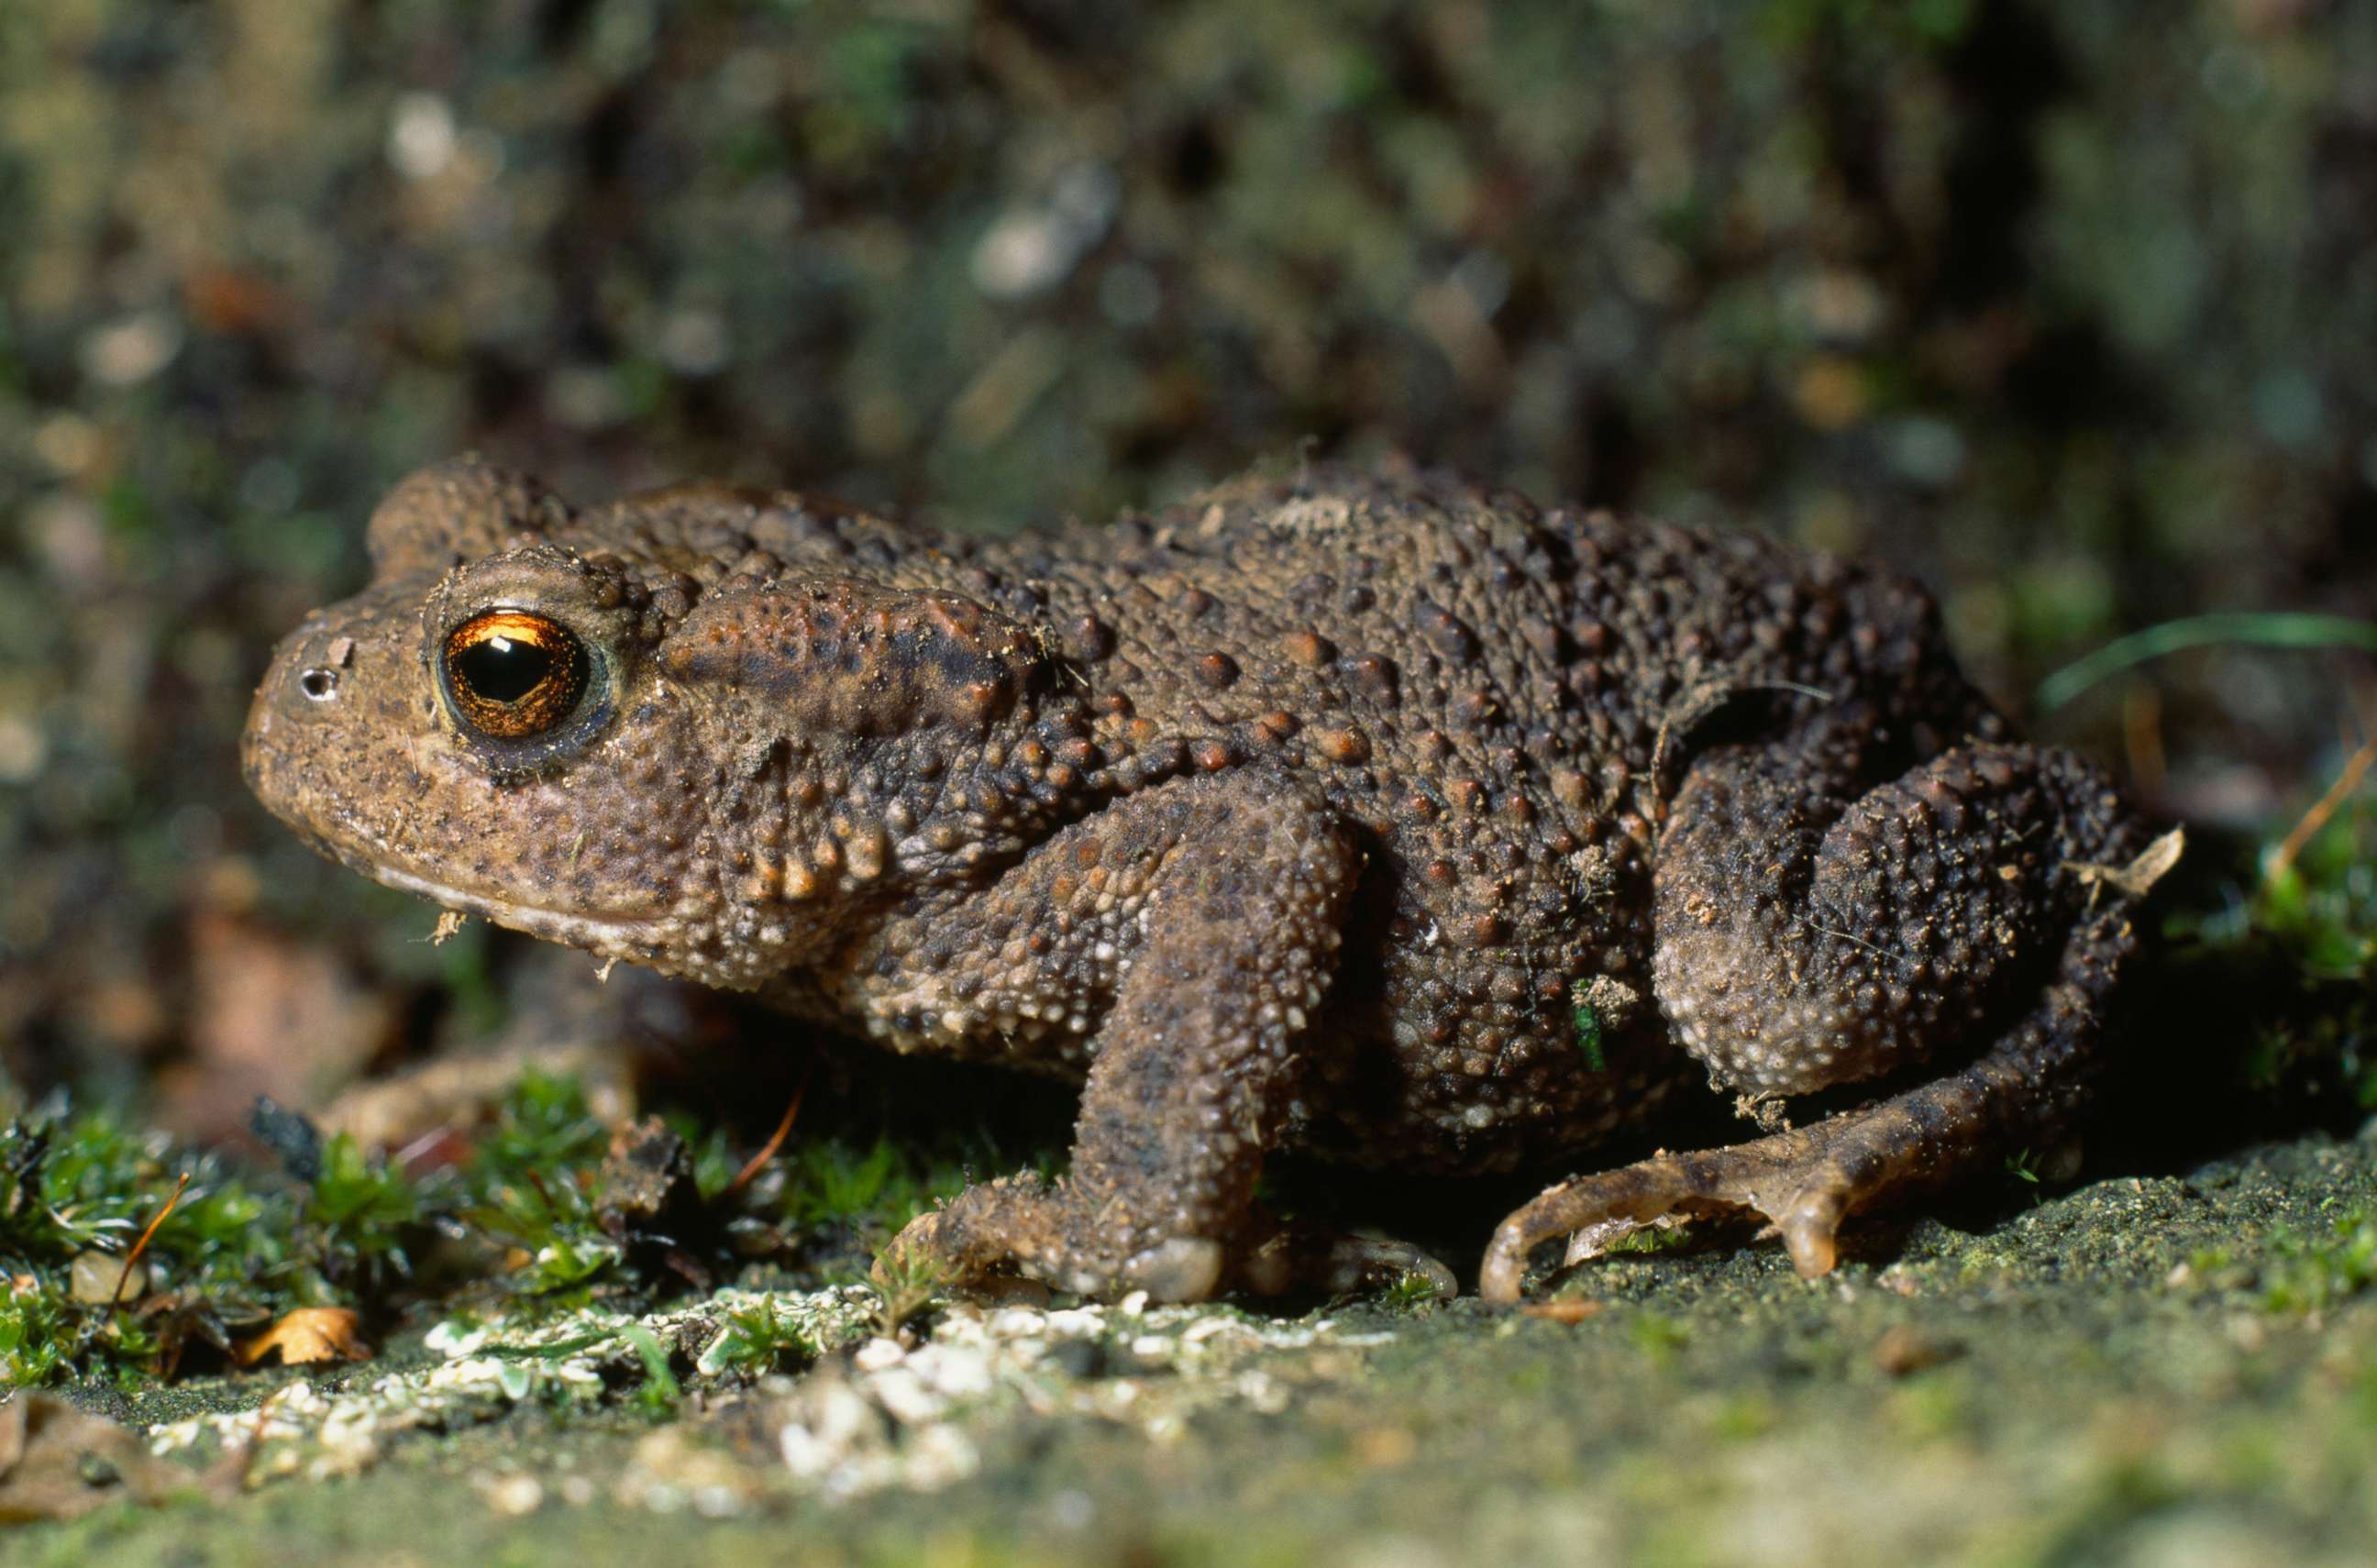 PHOTO: A Bufo Toad - also known as a Cane Toad